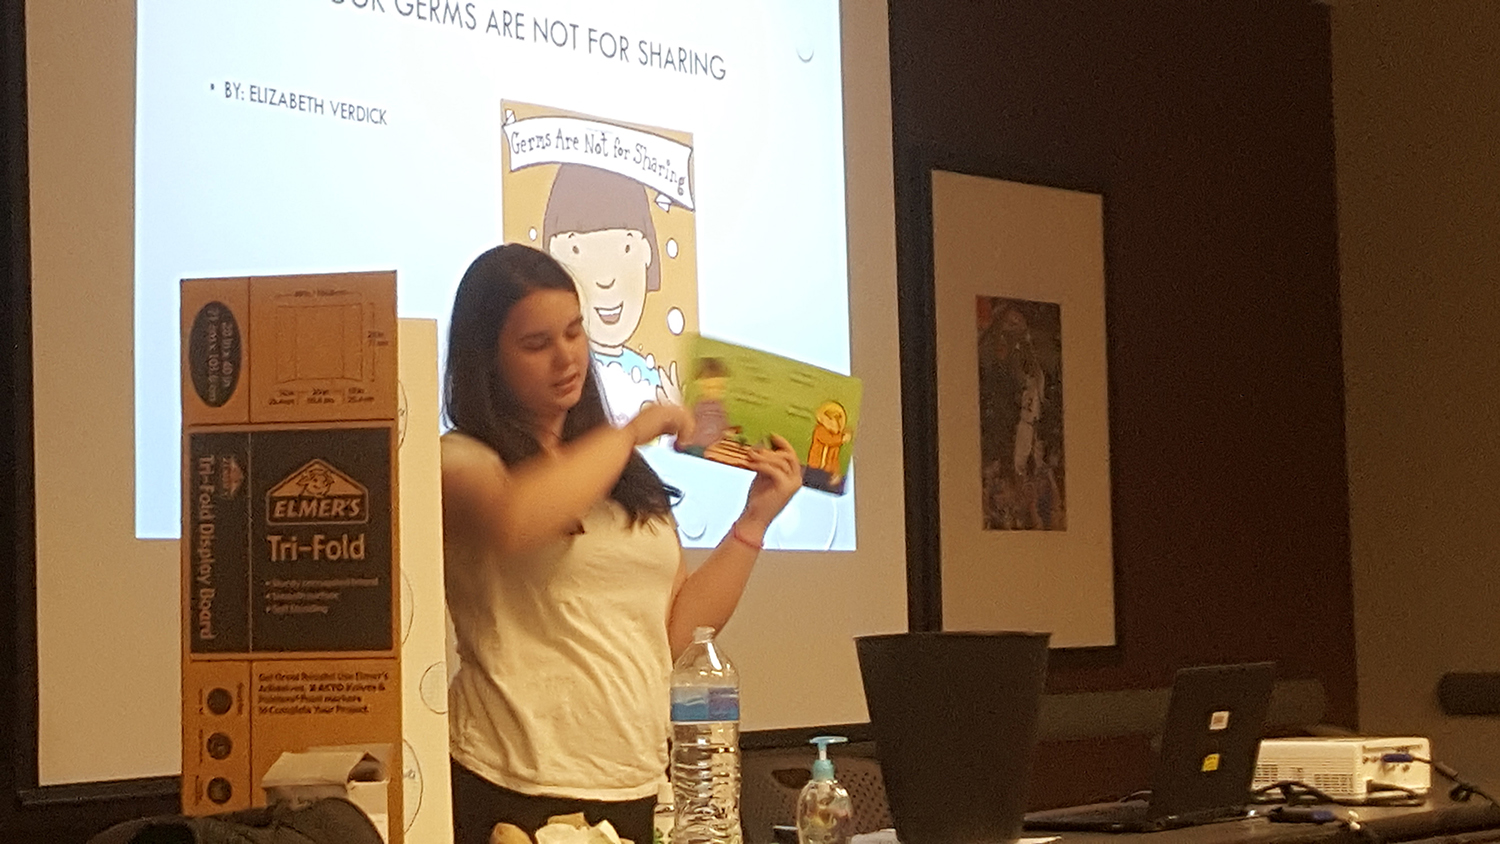 Natalie Gill is showing a book that you could read to preschoolers to teach about handwashing during her health visual